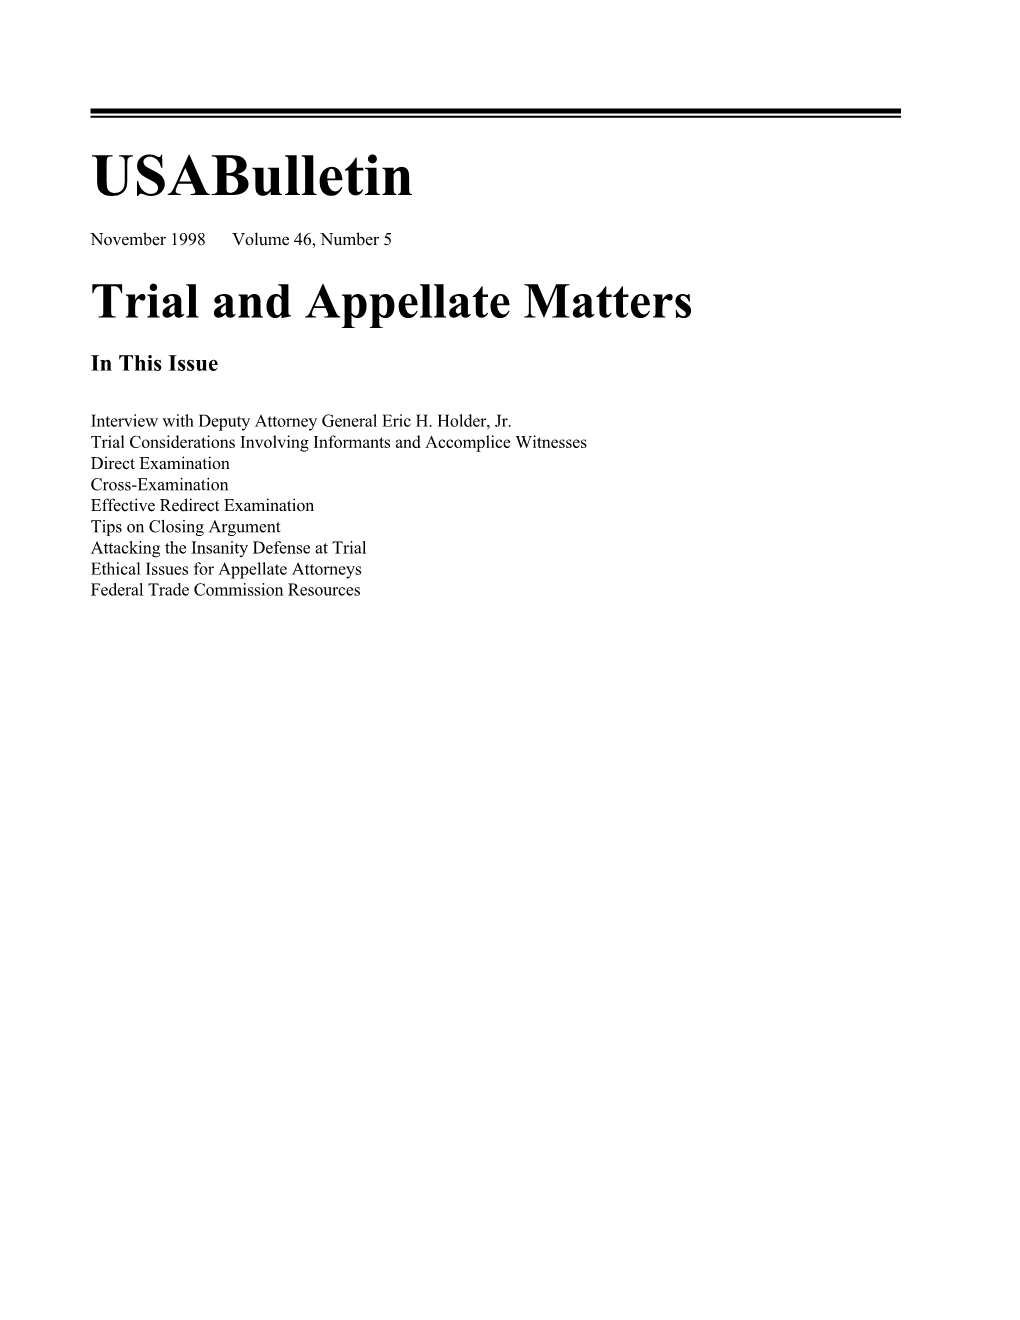 Trial and Appellate Matters